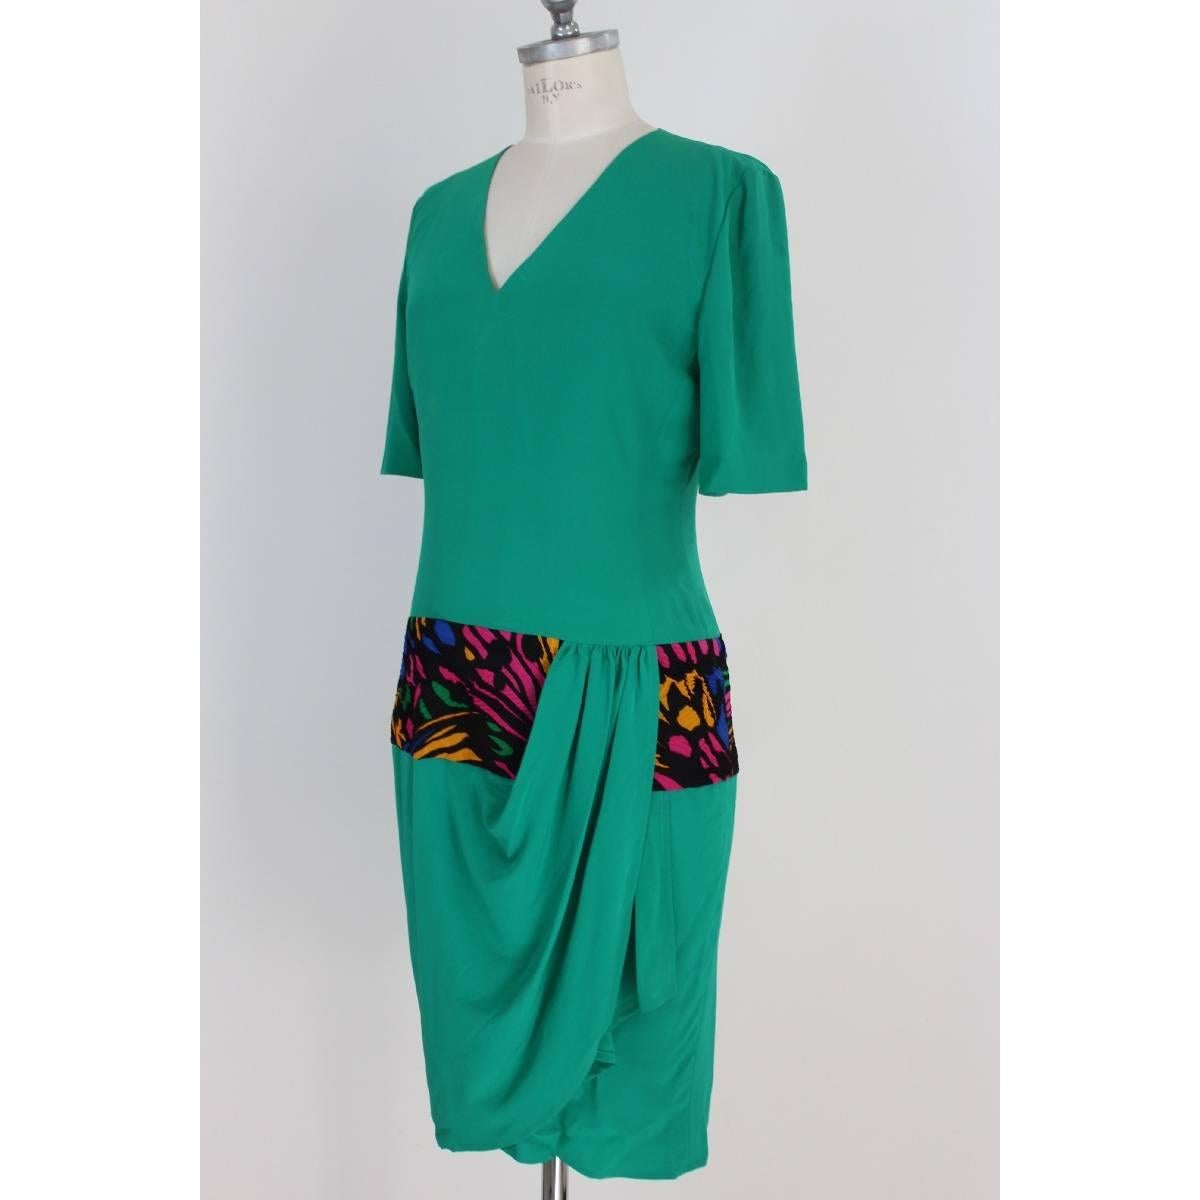 Mila Schon vintage silk dress. Green color, with multicolored band. Pleated embroidery. New with label. Made in Italy.

Size: 44 IT 10 US 12 UK

Shoulder: 44 cm
Bust / Chest: 48 cm
Sleeve: 30 cm
Length: 100 cm

Material: Silk
Green colour
Condition: